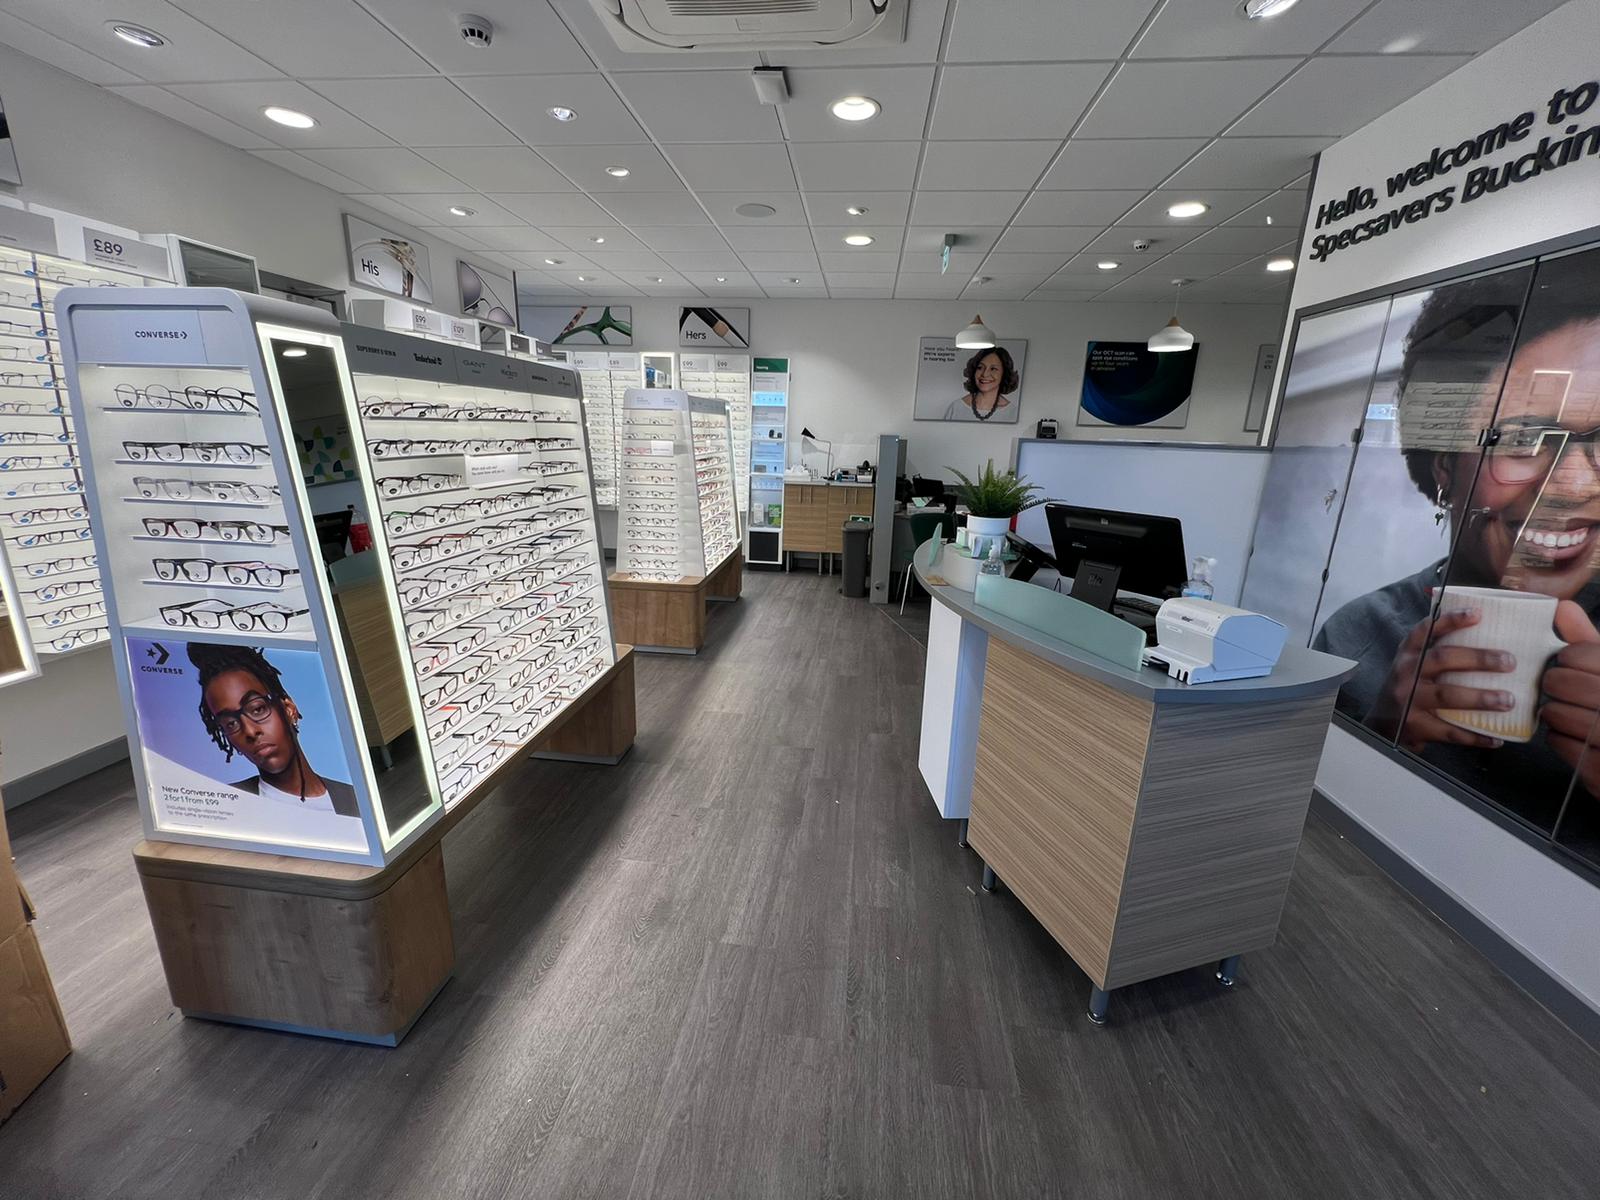 Specsavers Buckingham Specsavers Opticians and Audiologists - Buckingham Buckingham 01280 733081